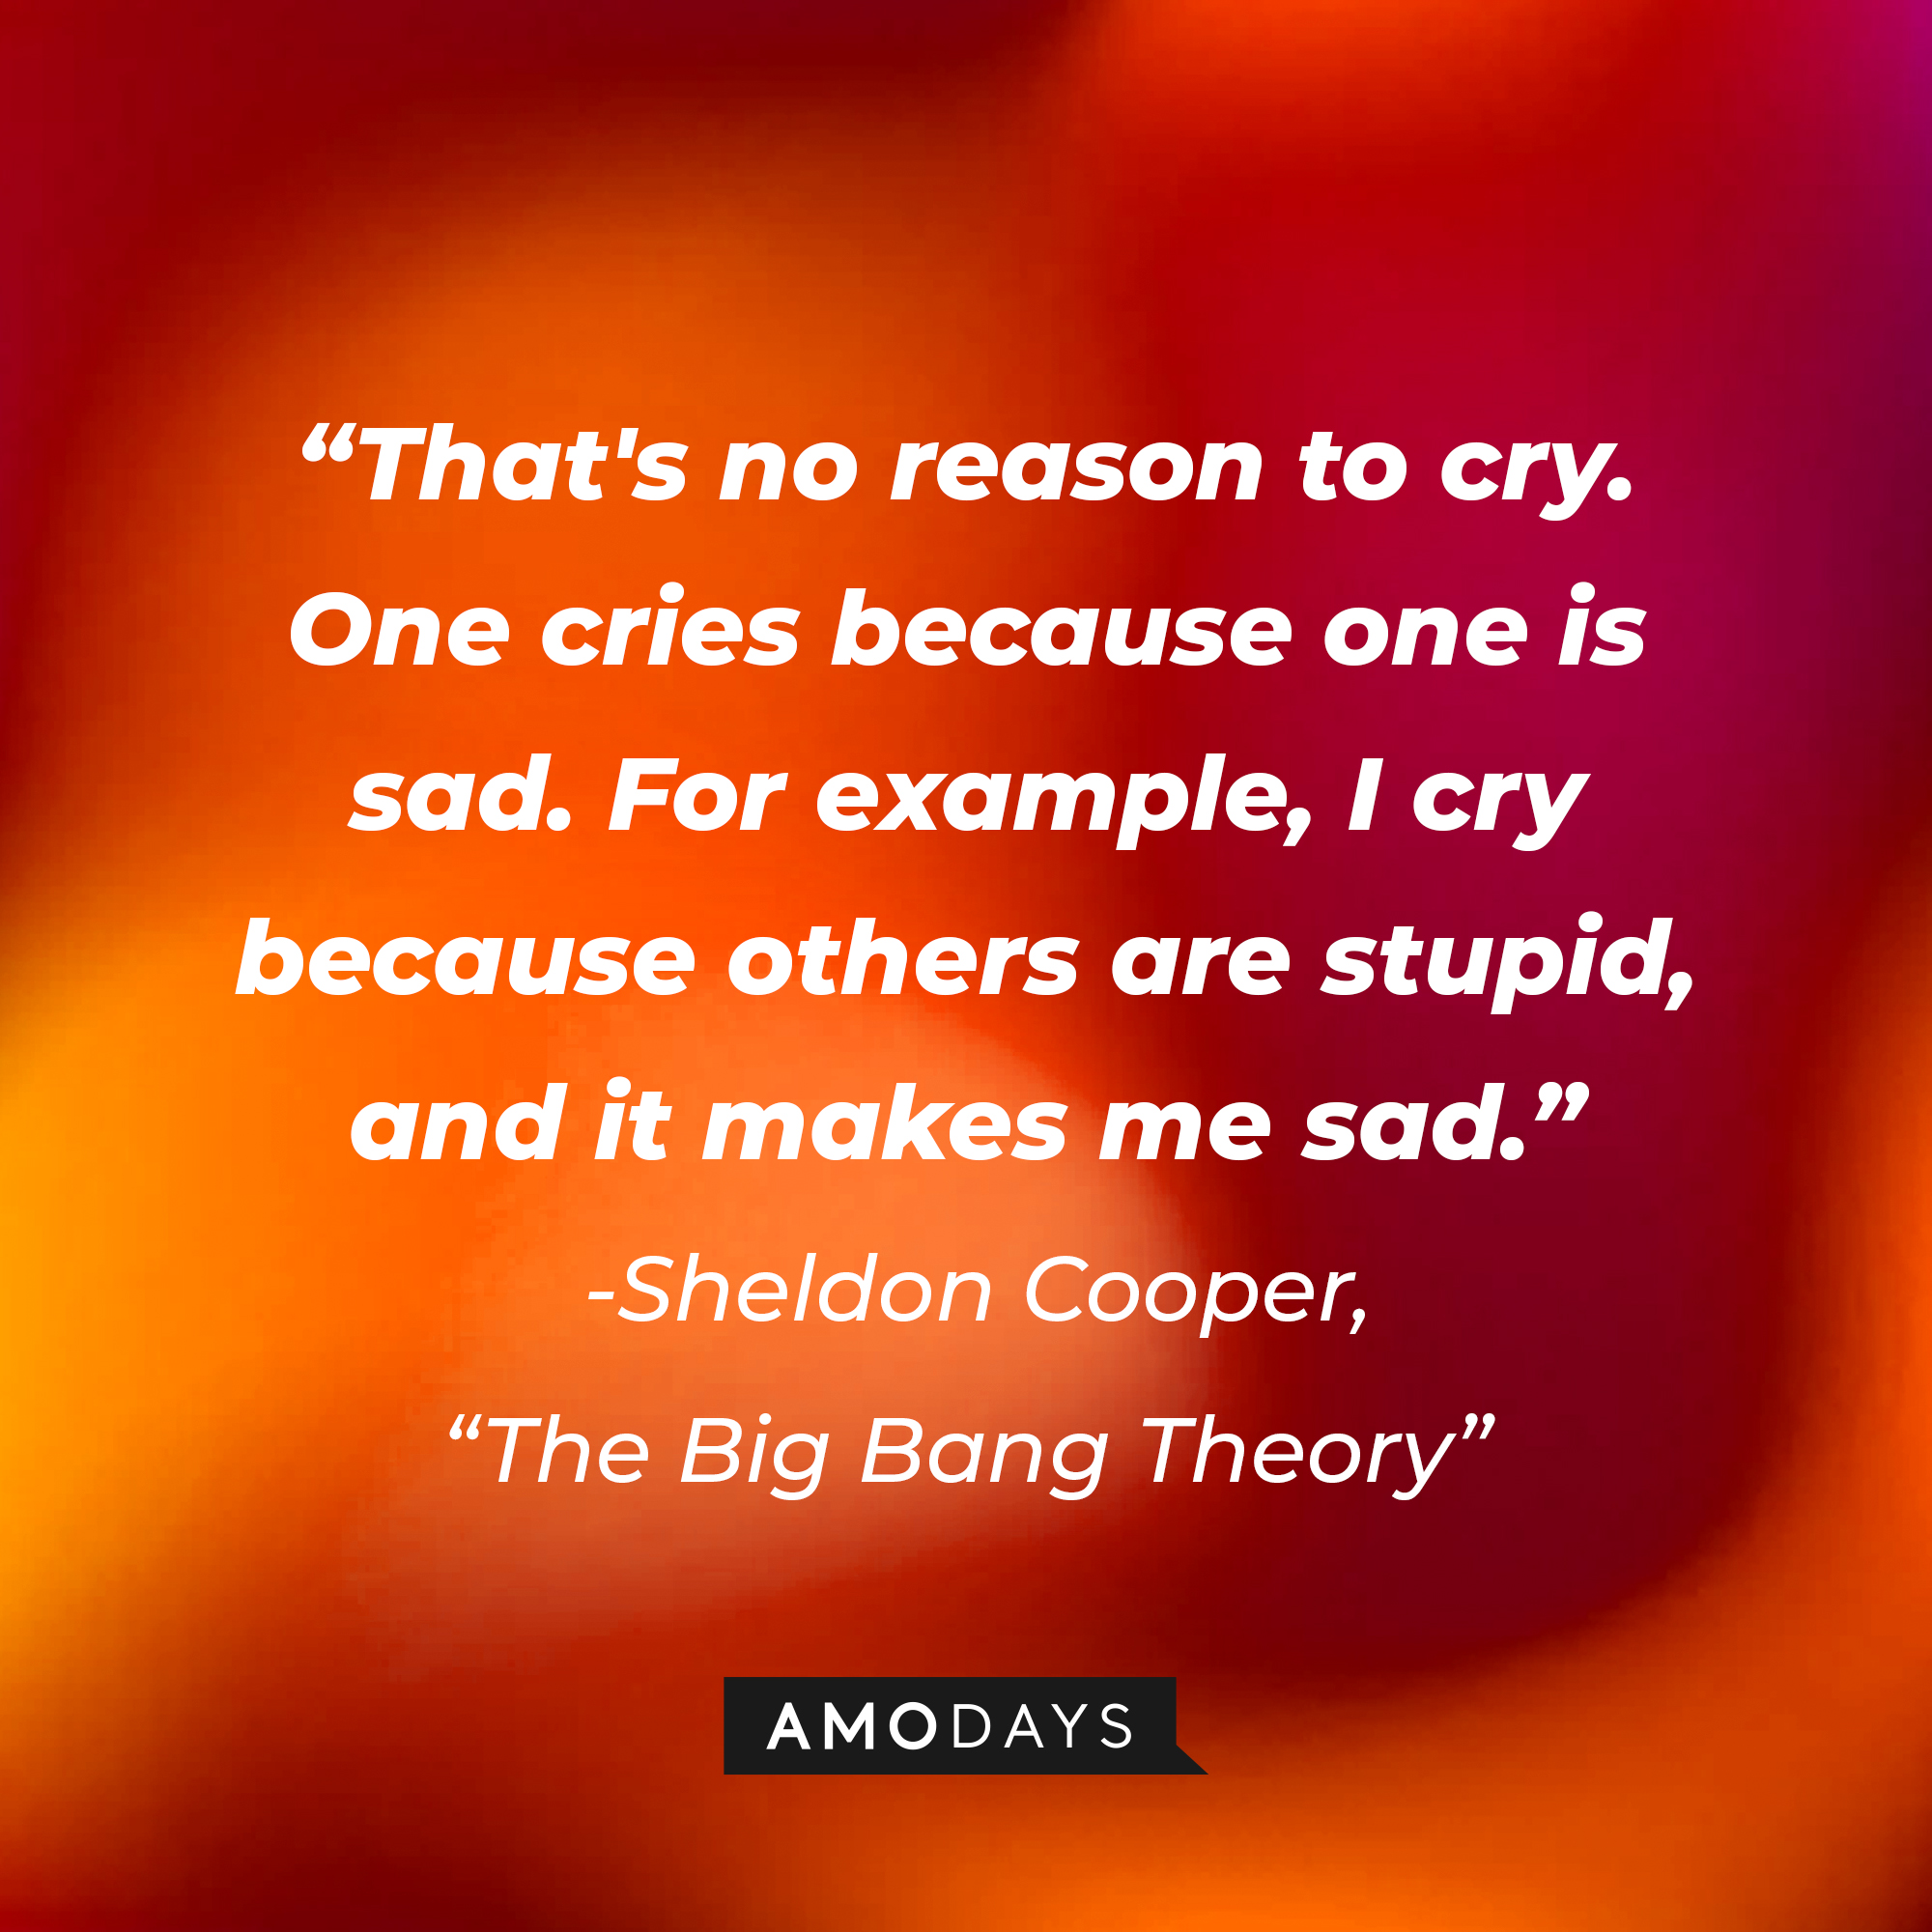 Sheldon Cooper's quote from "The Big Bang Theory": "That's no reason to cry. One cries because one is sad. For example, I cry because others are stupid, and it makes me sad." | Source: Amodays